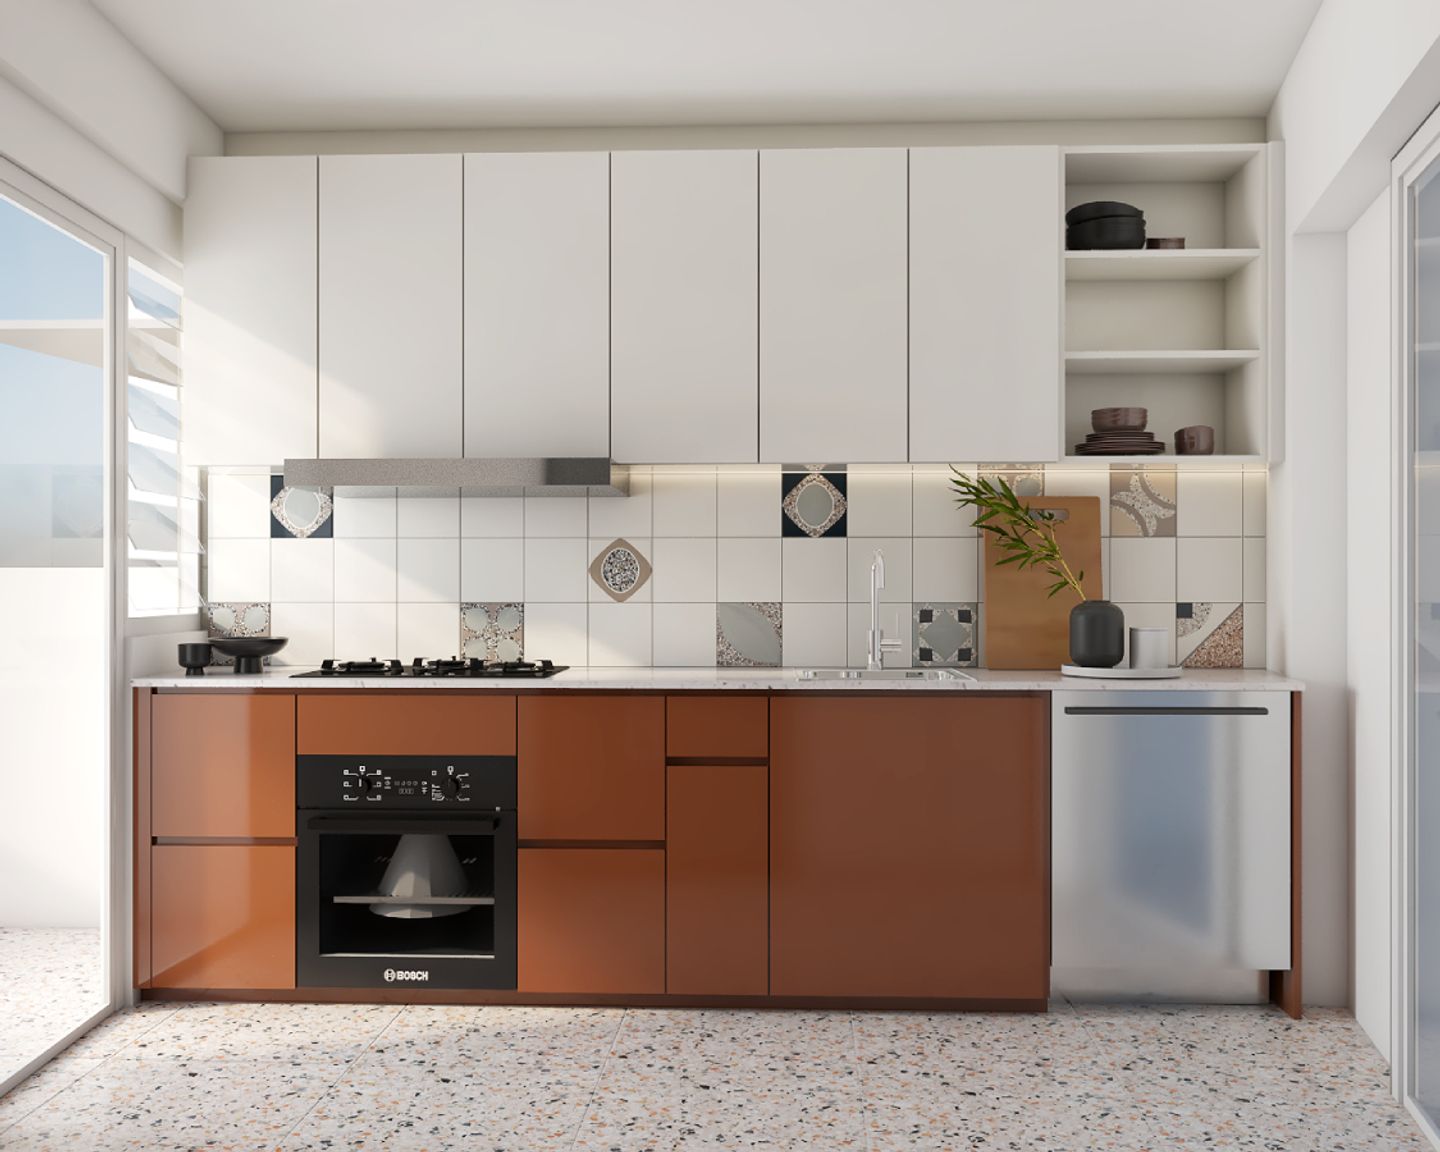 Minimalist Kitchen Design With White And Orange Cabinets For Open And Closed Storage - Livspace